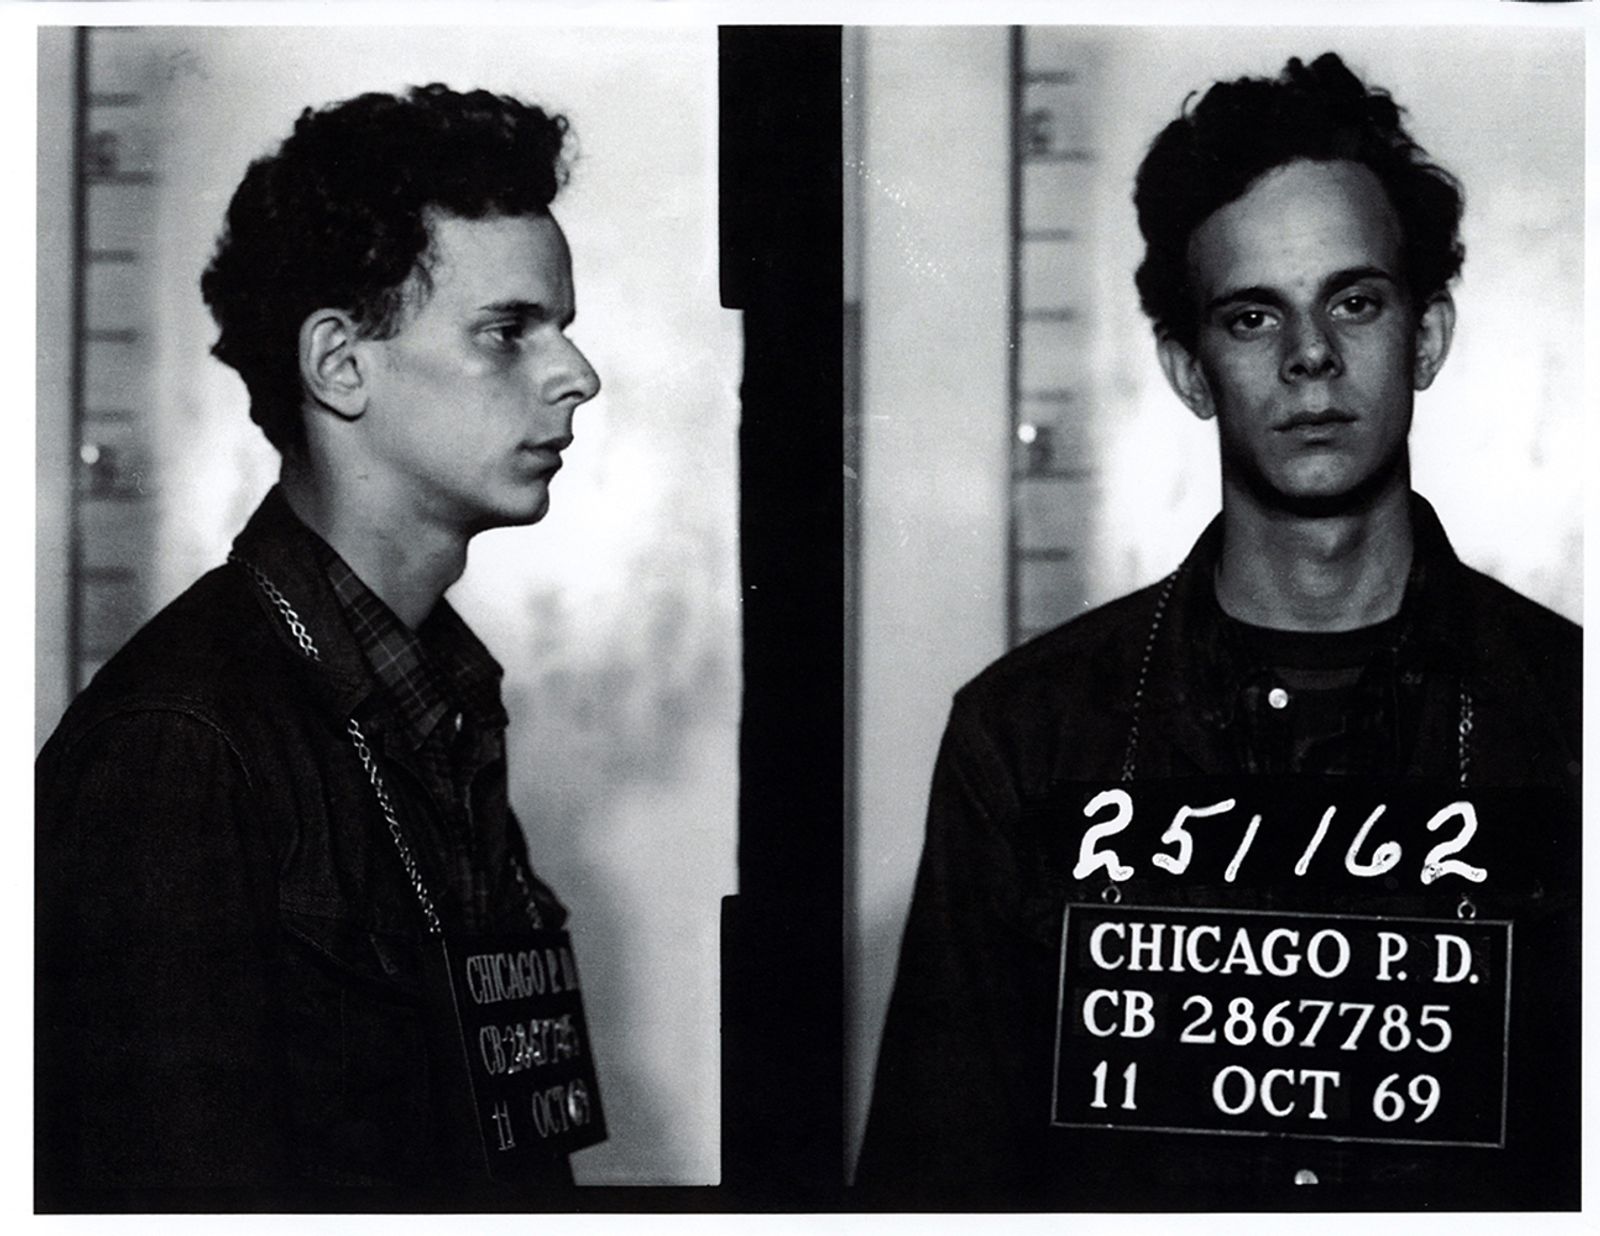 © Alice Proujansky - My father's mug shots taken when he was arrested for mob action during the 1968 Days of Rage in Chicago.